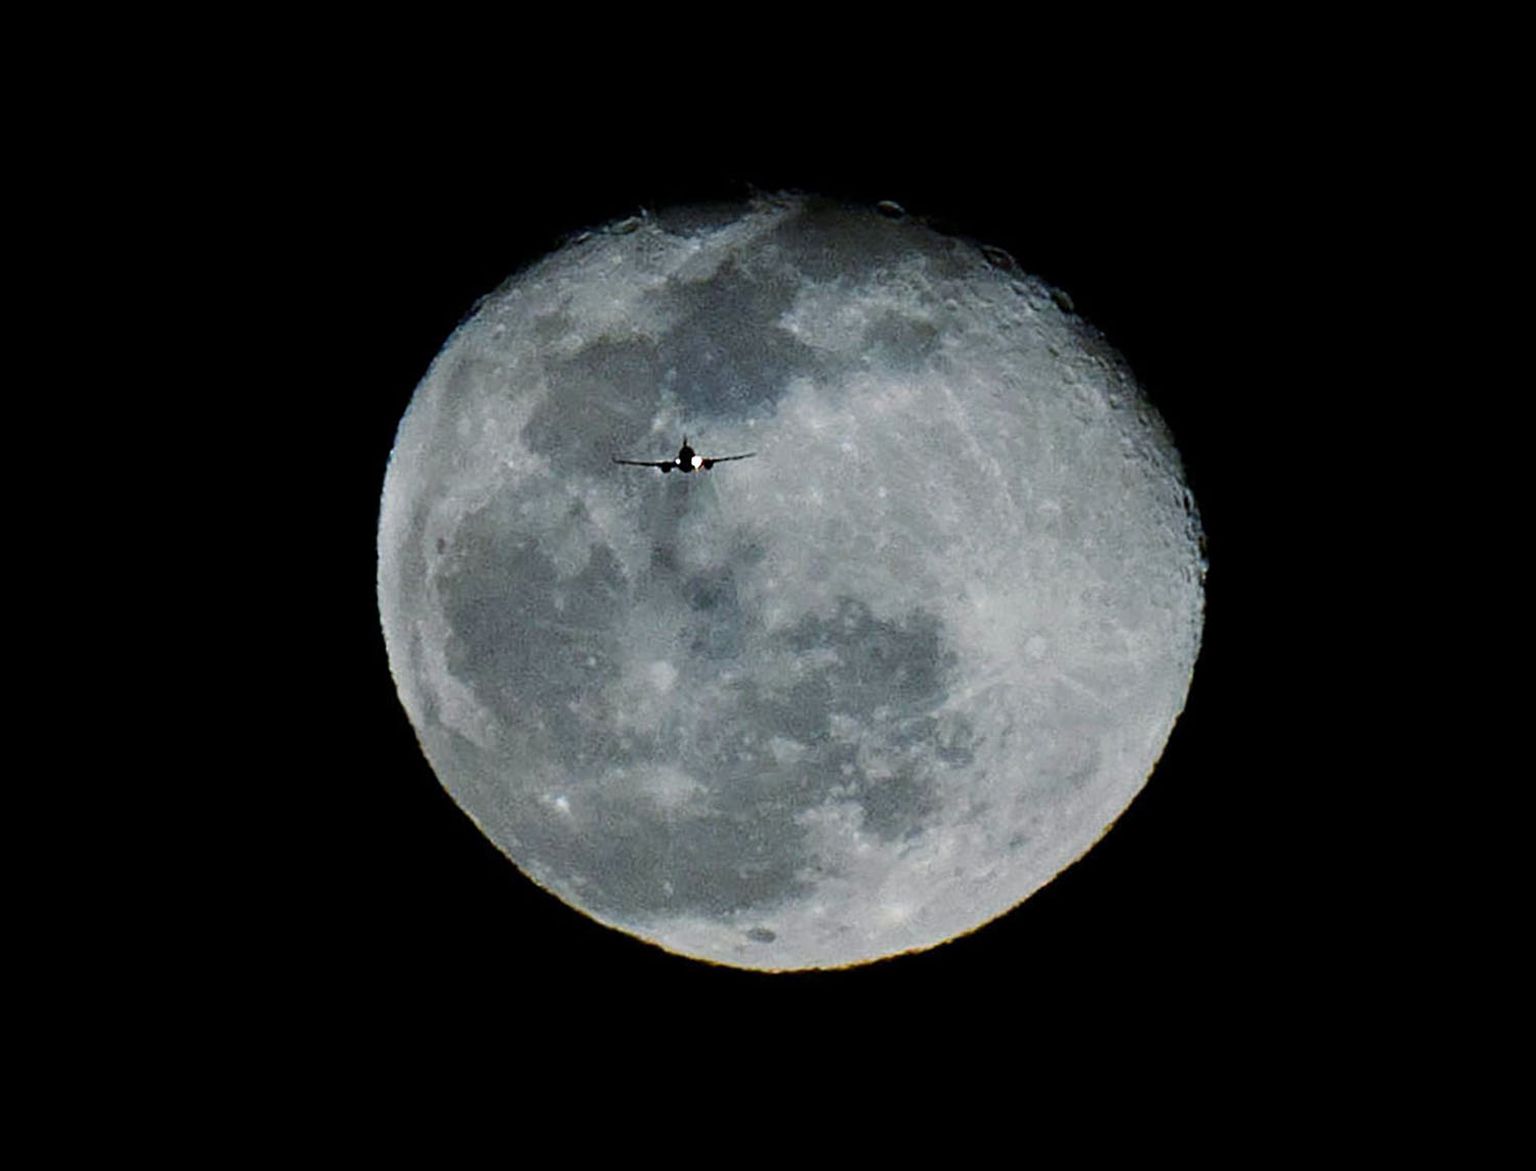 February 28, 2021, California, USA: Southwest flight 1077 flying from Phoenix to Ontario is silhouetted in front of an almost full Moon in Moreno Valley on Sunday, February 28, 2021. (Credit Image: © Terry Pierson/Orange County Register via ZUMA Wire)